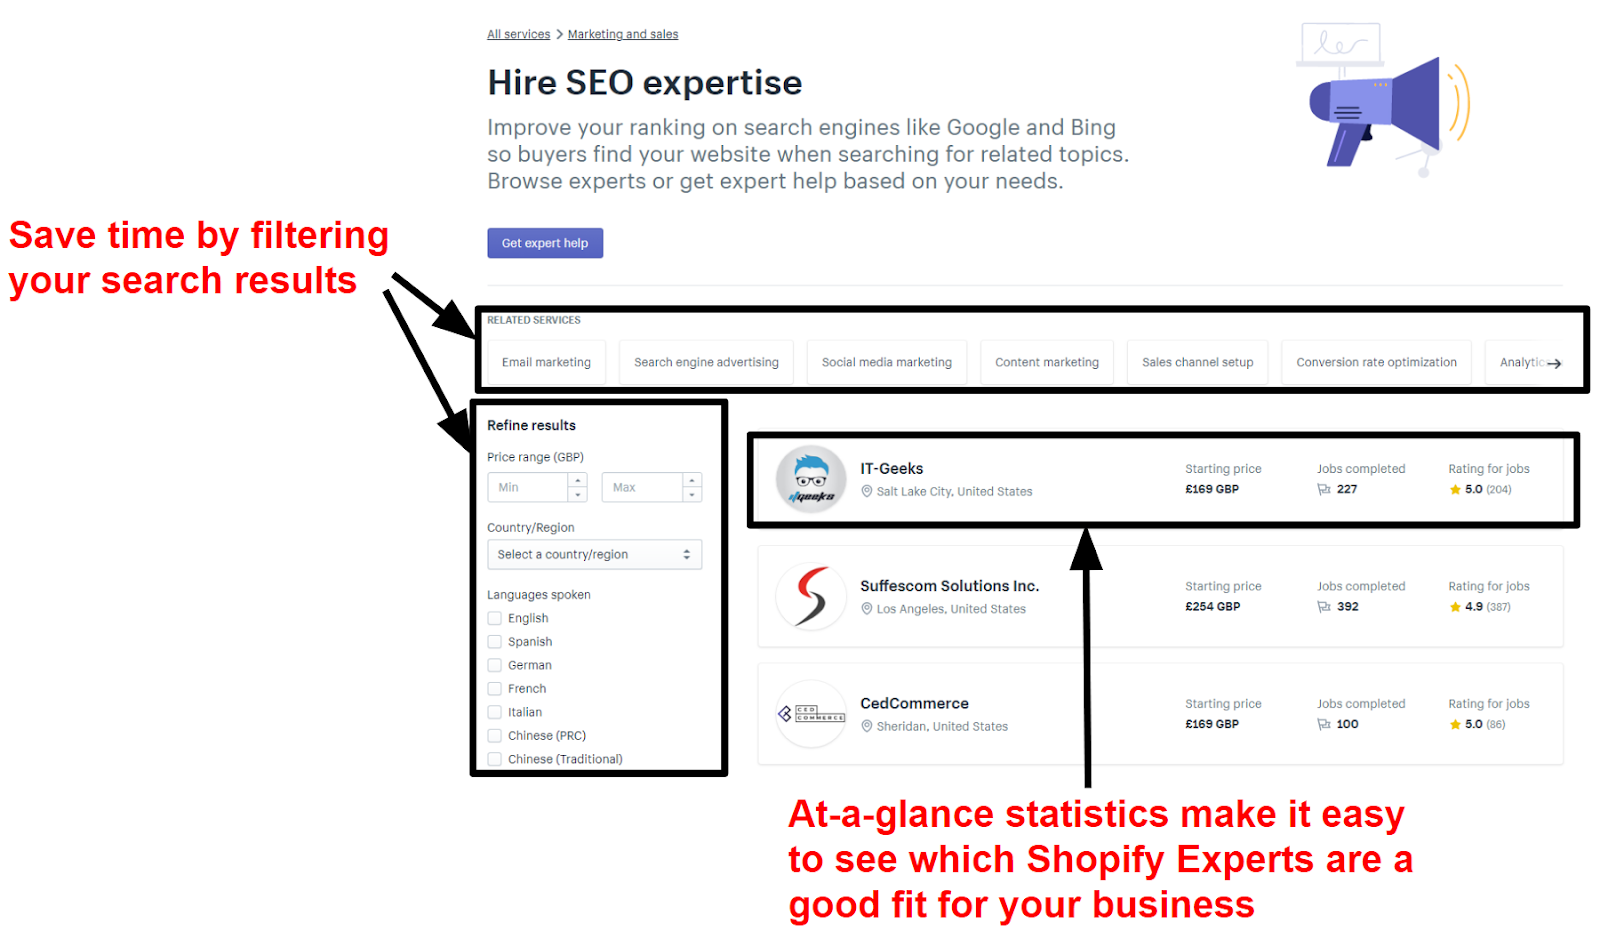 Shopify Experts directory